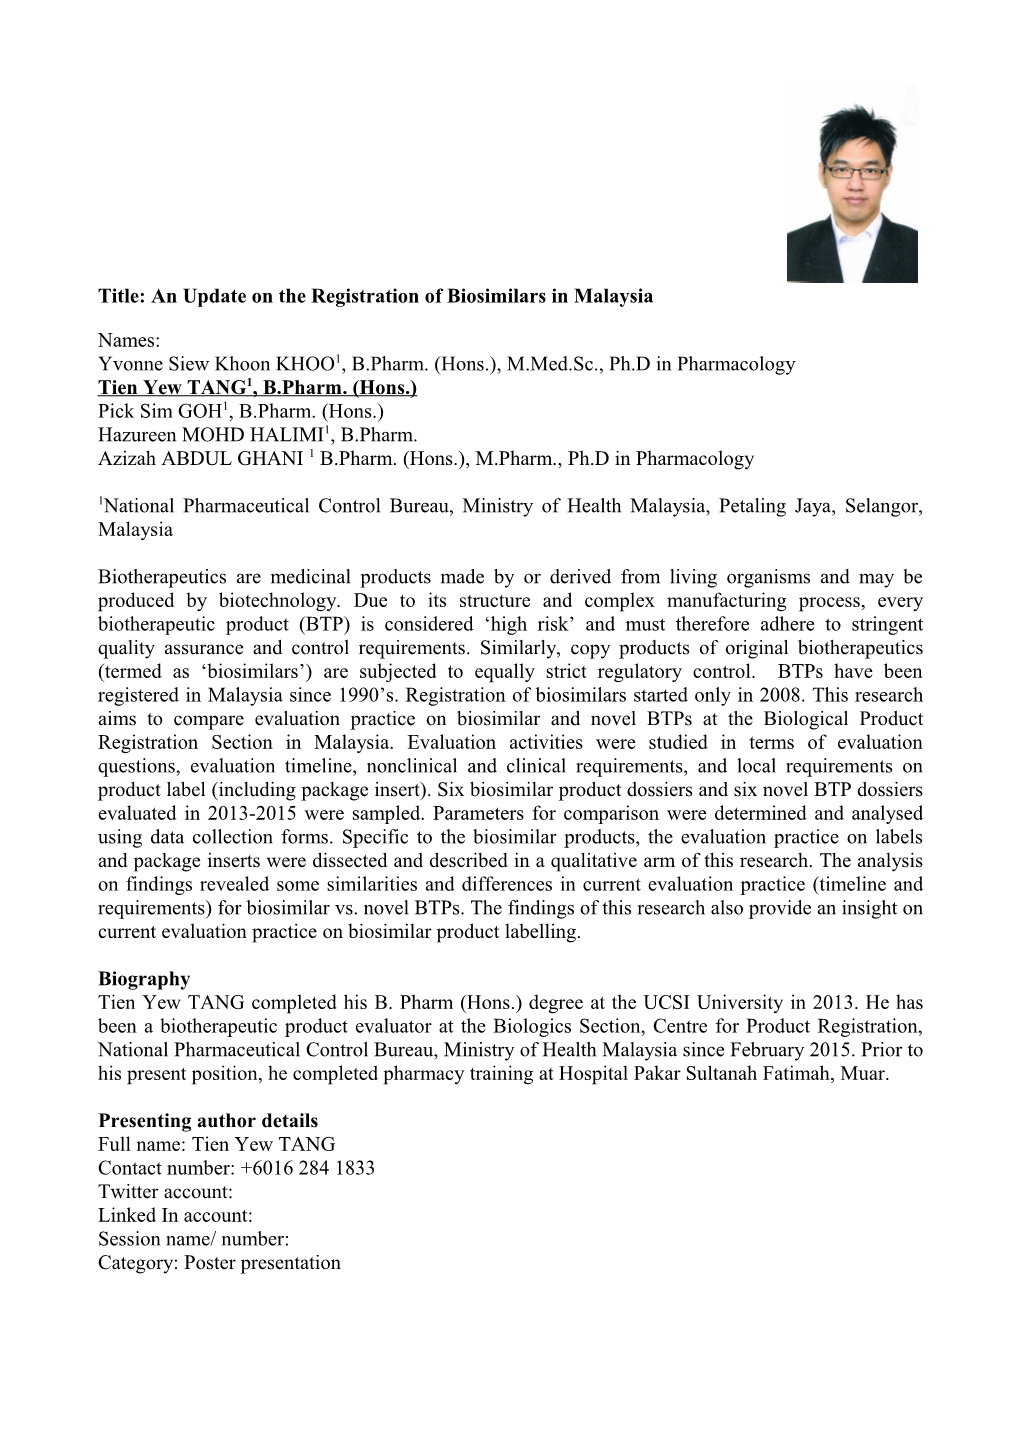 Title: an Update on the Registration of Biosimilars in Malaysia